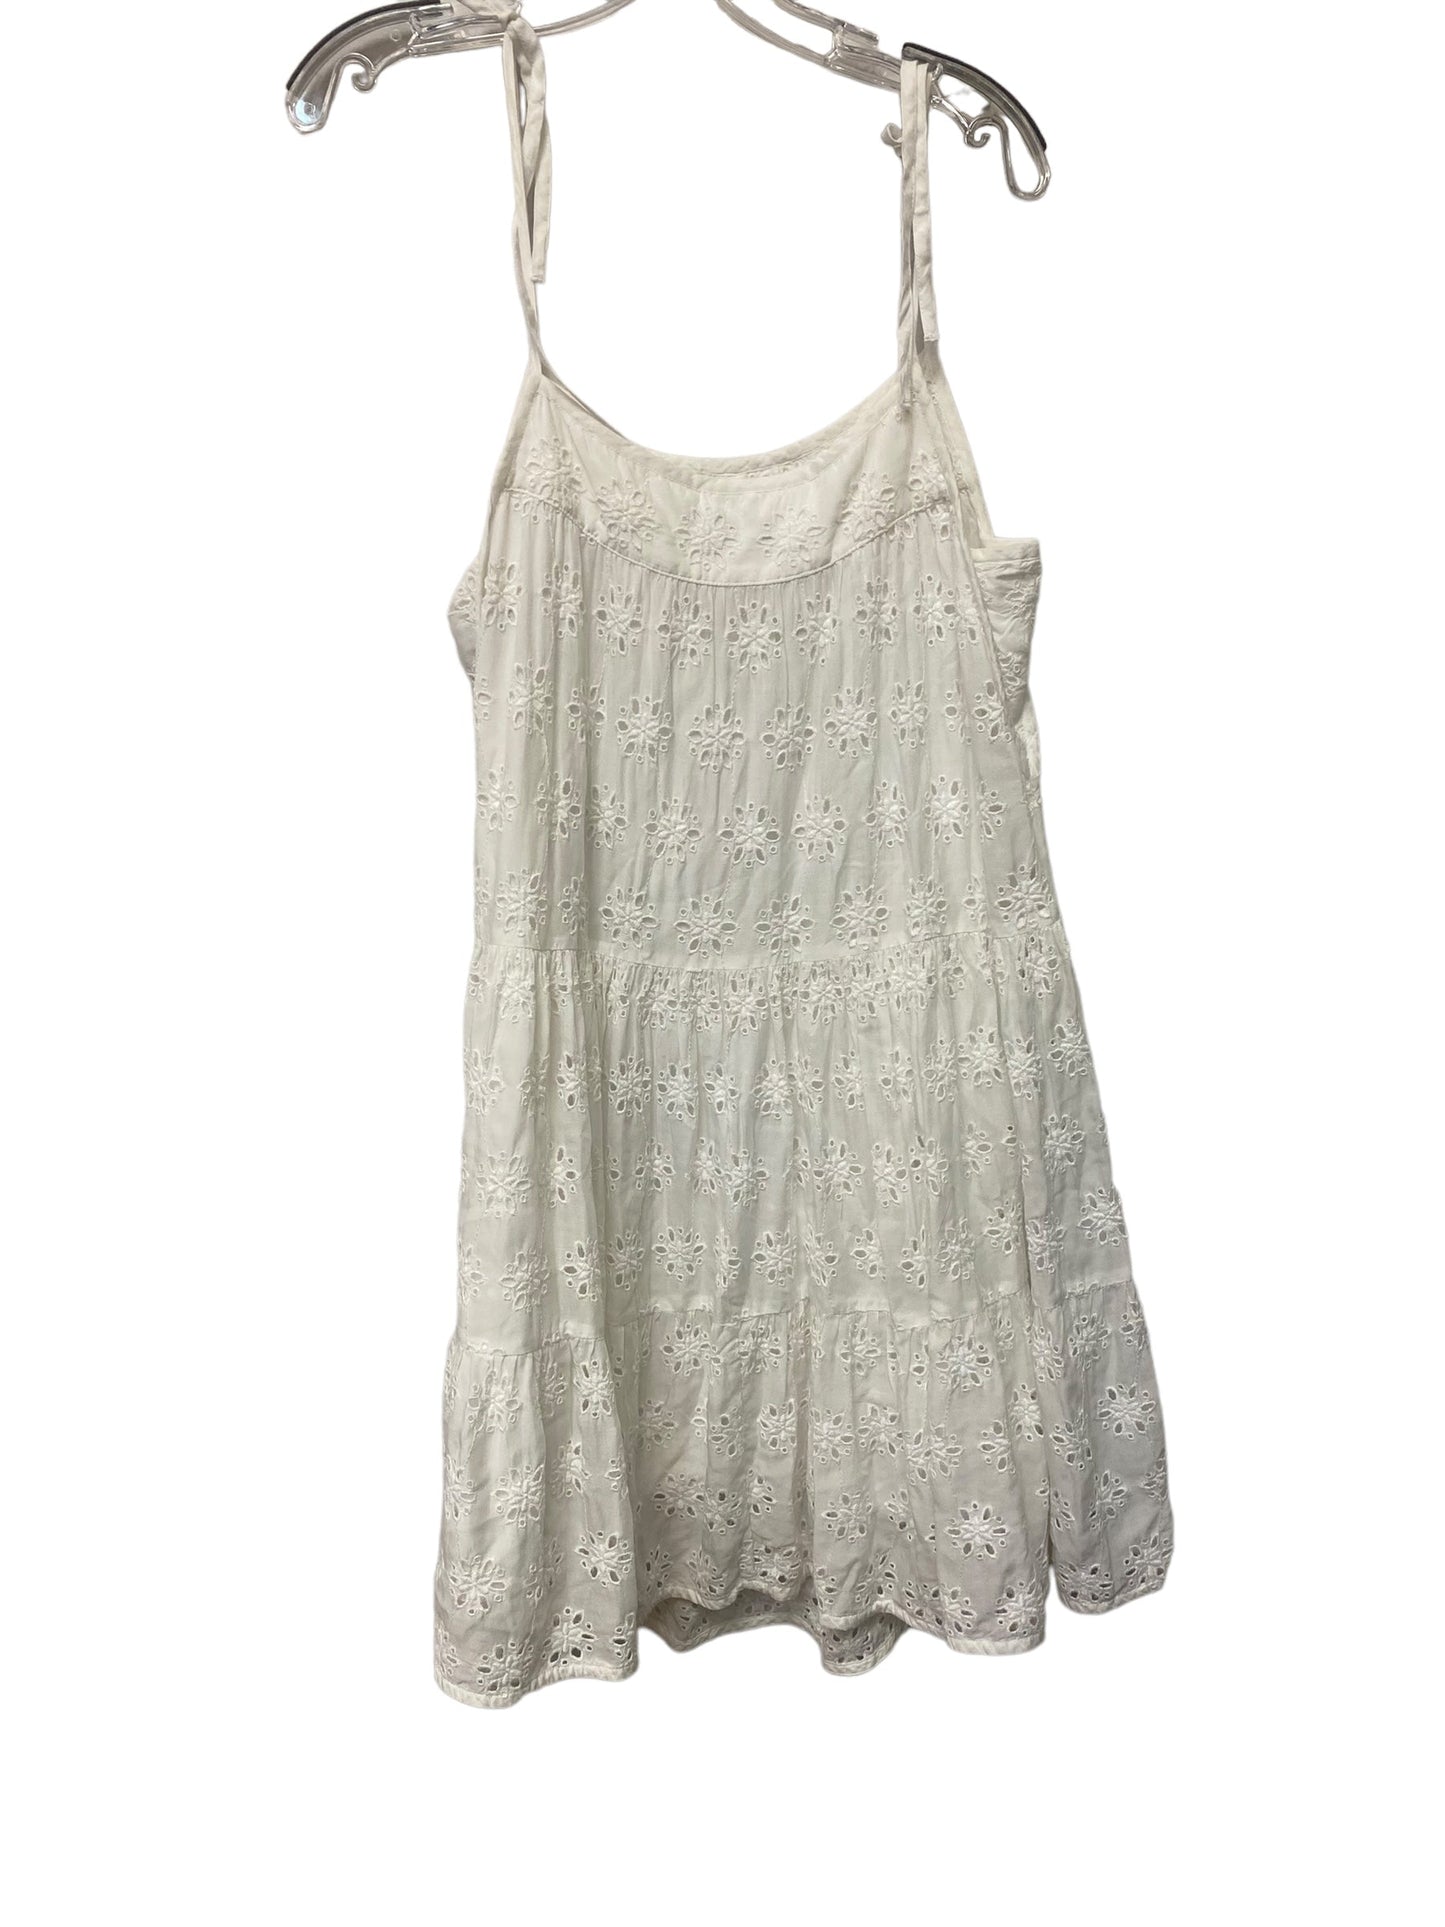 Dress Casual Short By Lucky Brand  Size: S